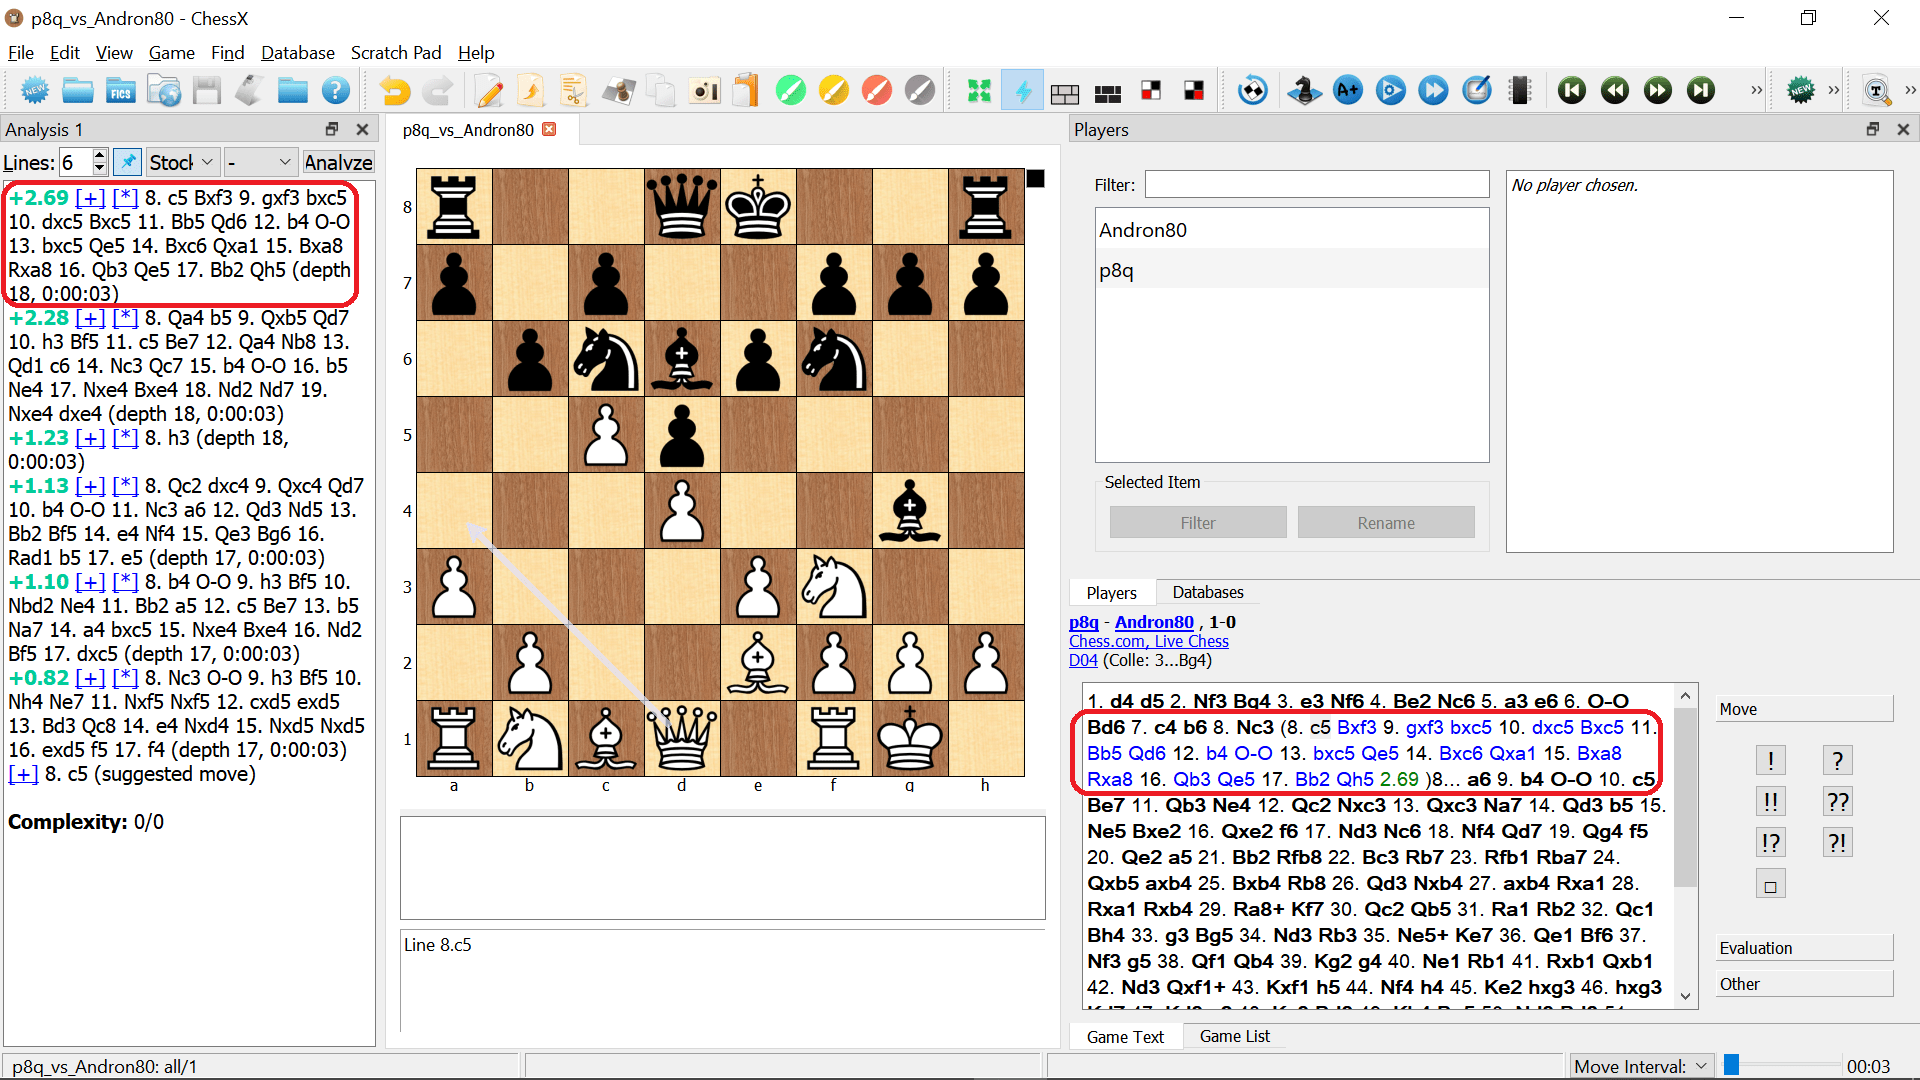 Game Report Pro - Automate Analysis of Chess.com games : r/chess